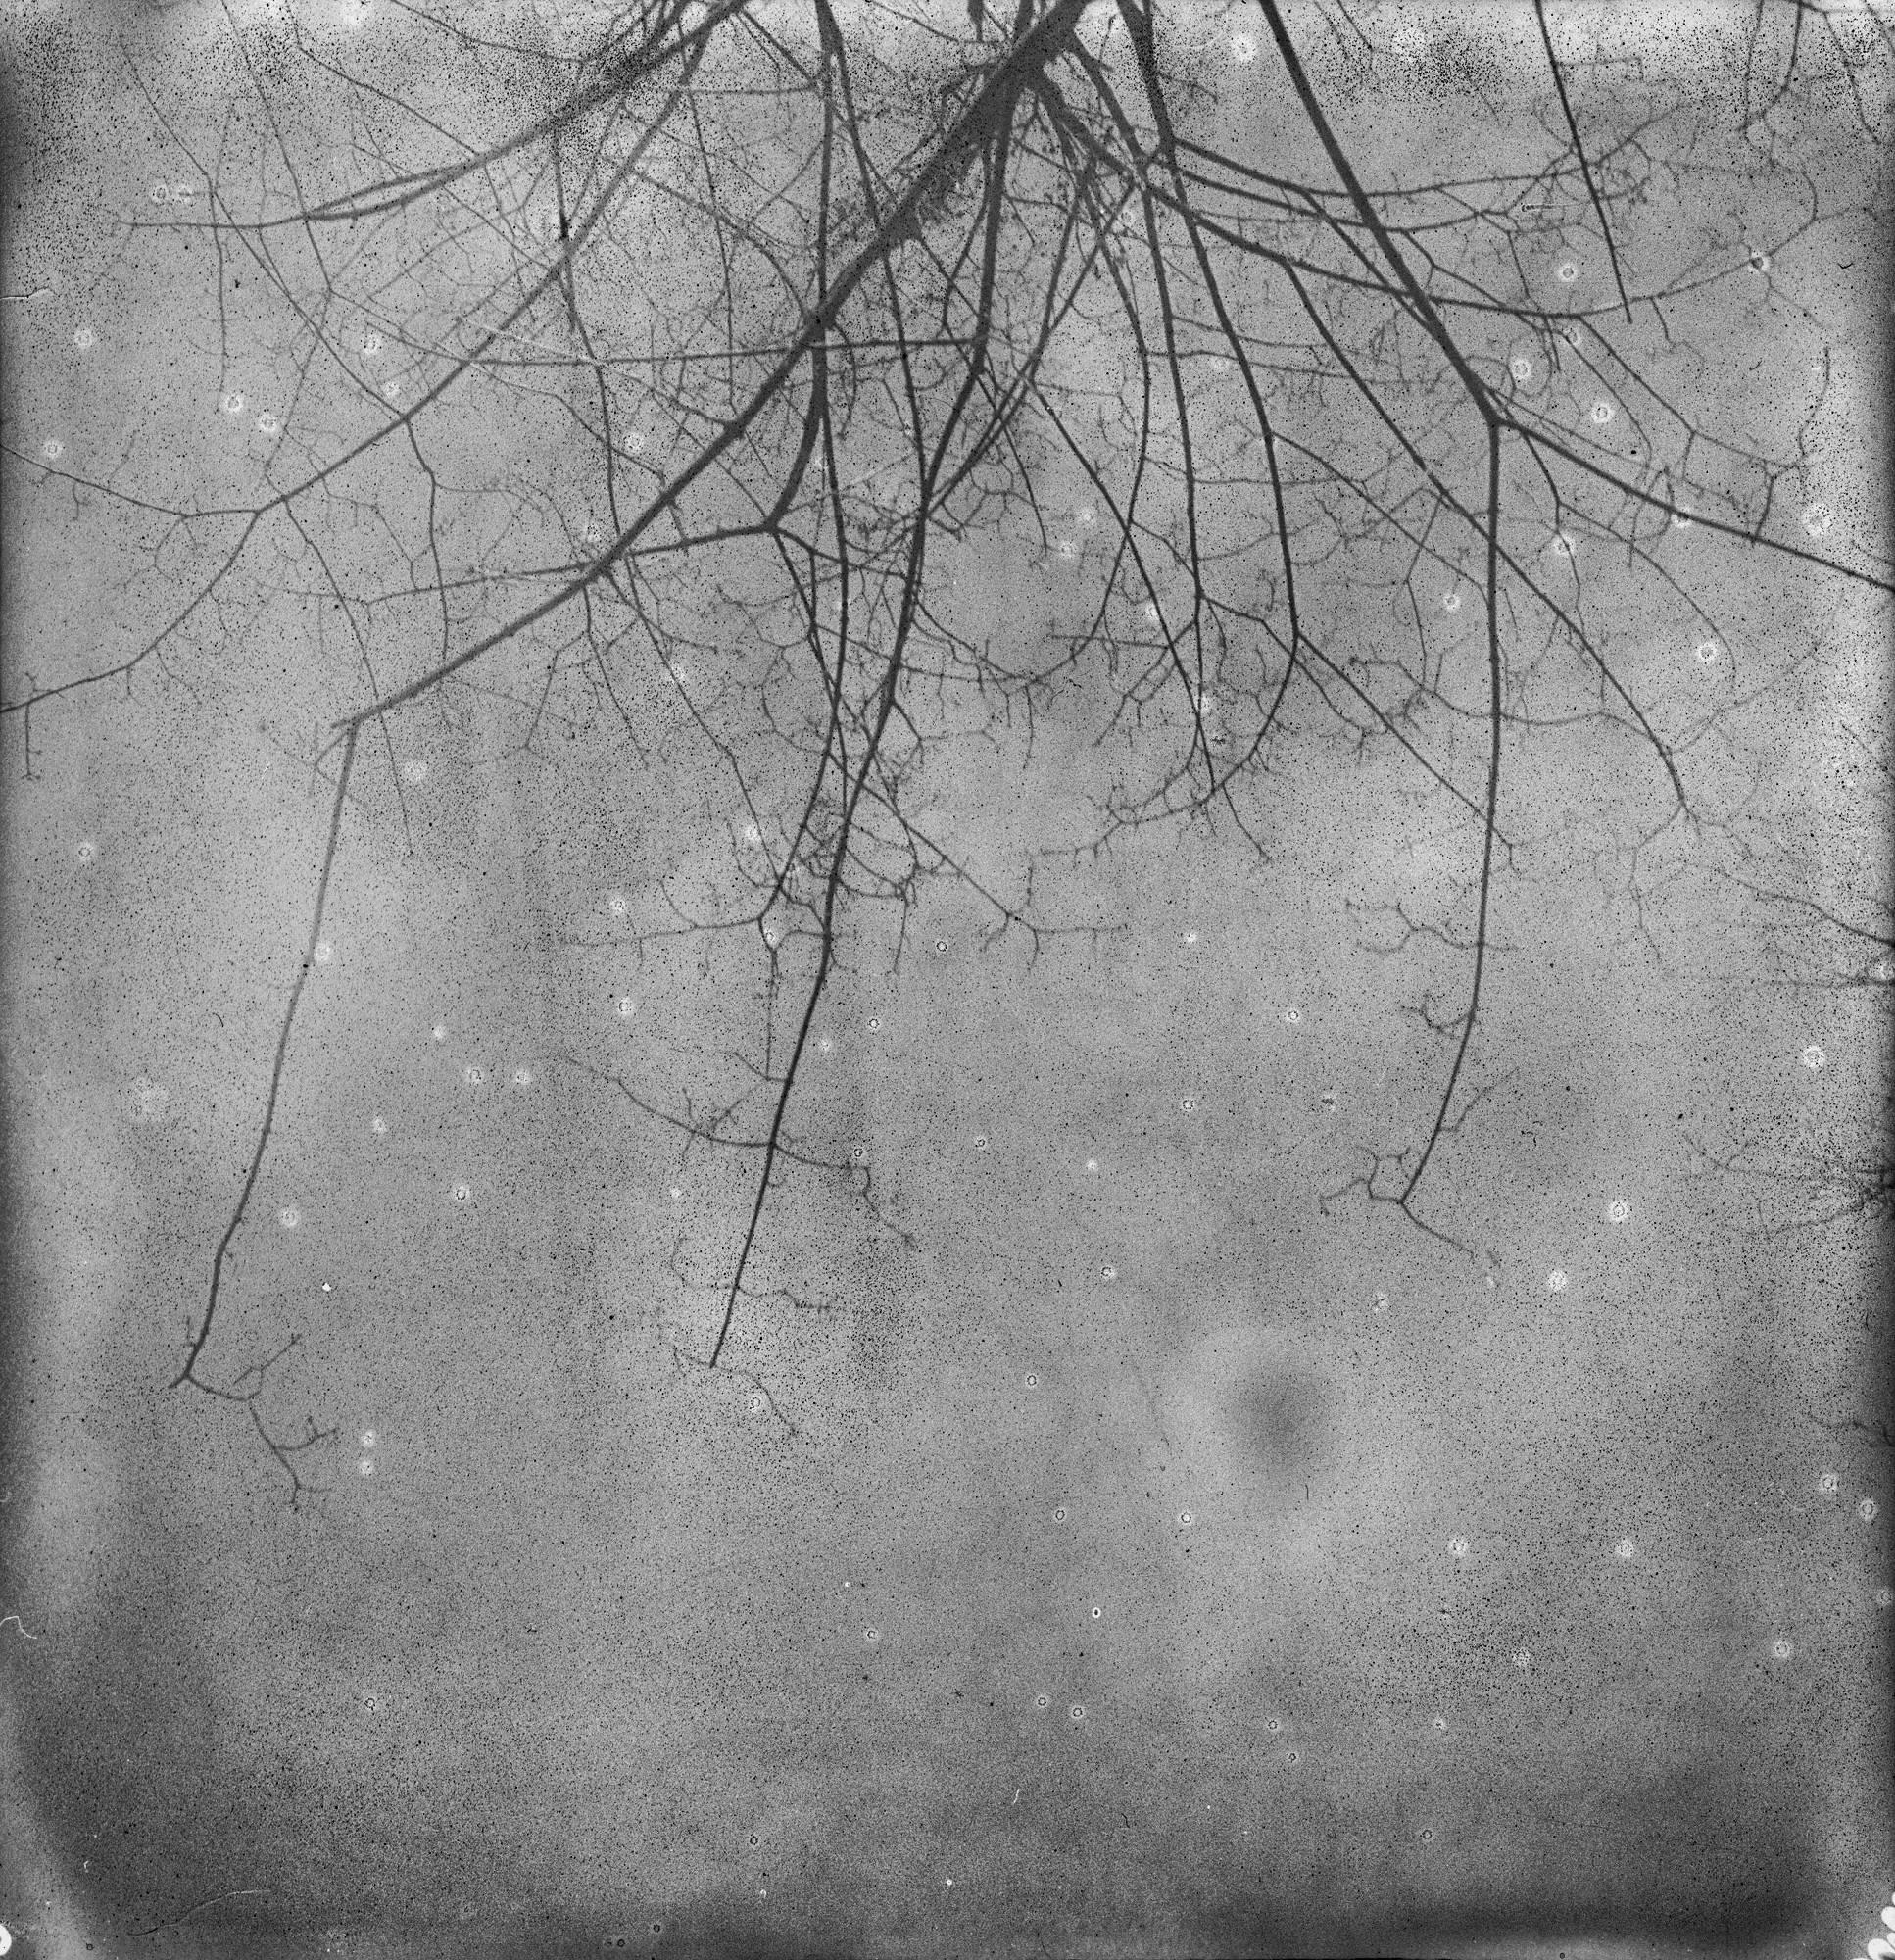 'And also the Trees’, 2017, 21 x 20 cm, Edition 2/10, digital C-Print based on a reclaimed Polaroid negative, not mounted. Numbered and signed on the back by the artist, not mounted.

Artist Statement
“Since my childhood days I always loved taking